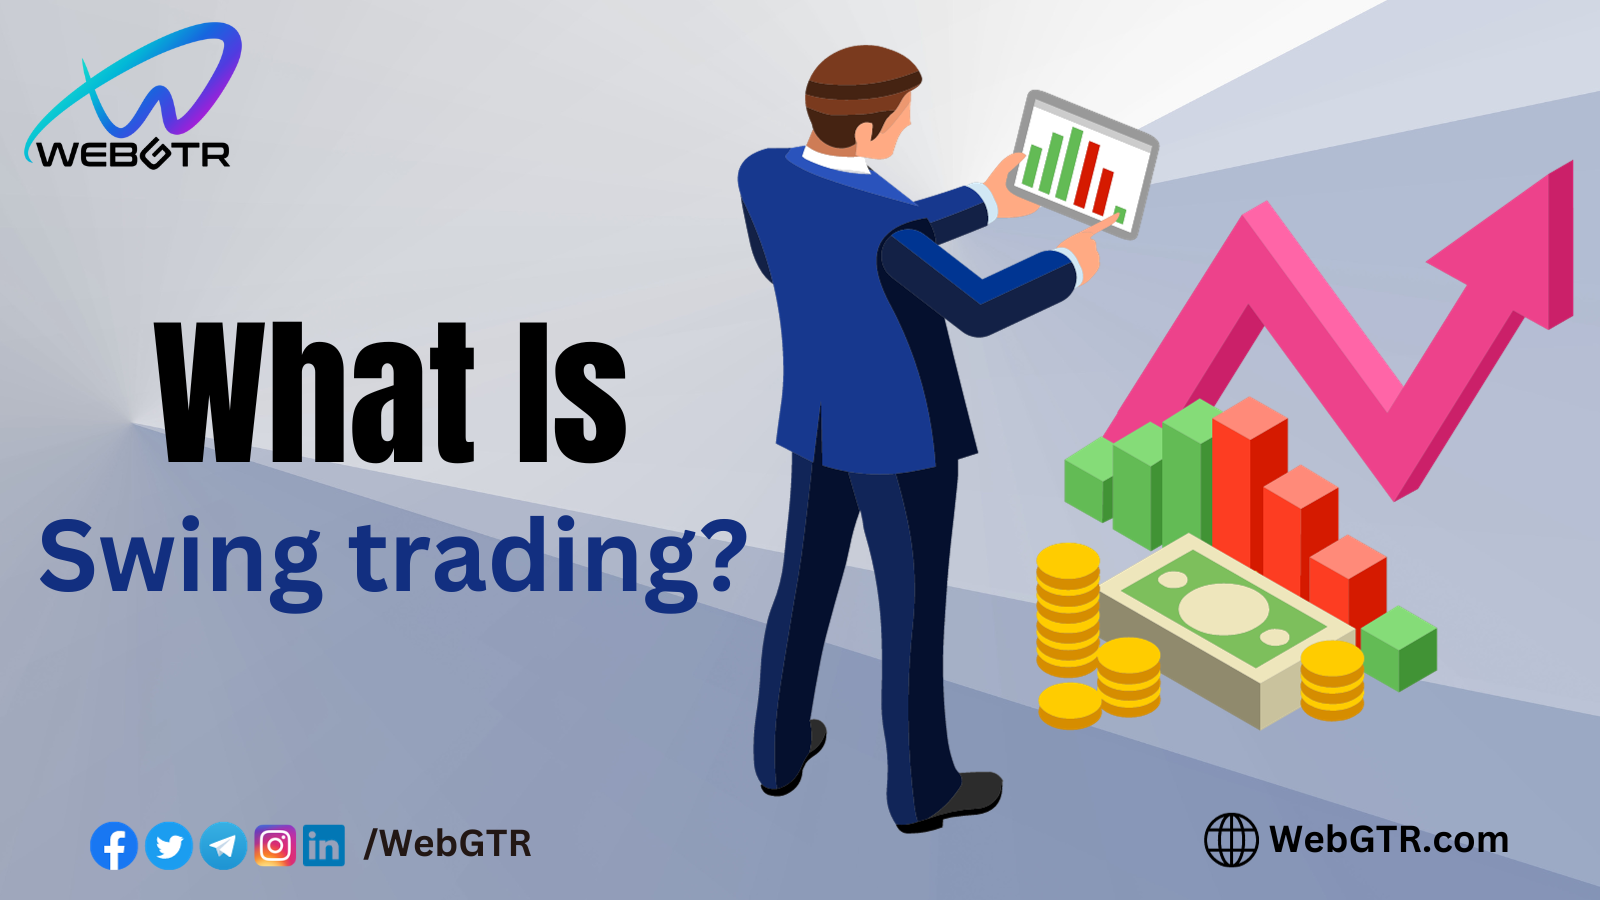 What is Swing trading?